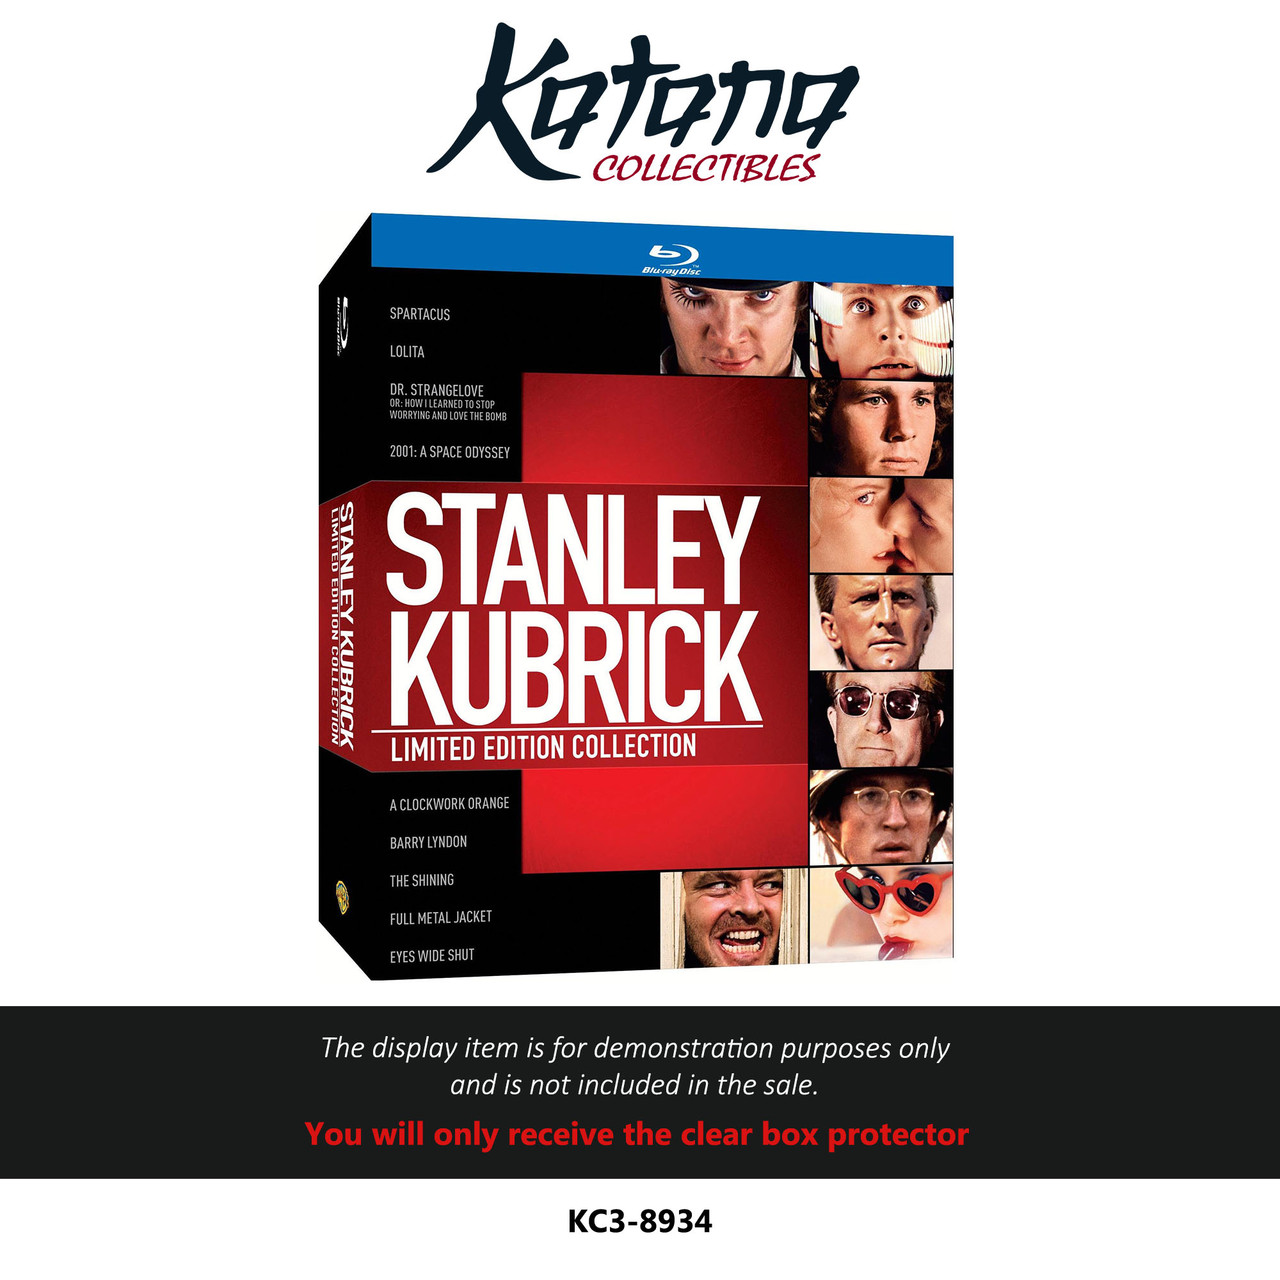 Katana Collectibles Protector For Stanley Kubrick Limited Edition Collection Blu Ray Box Set